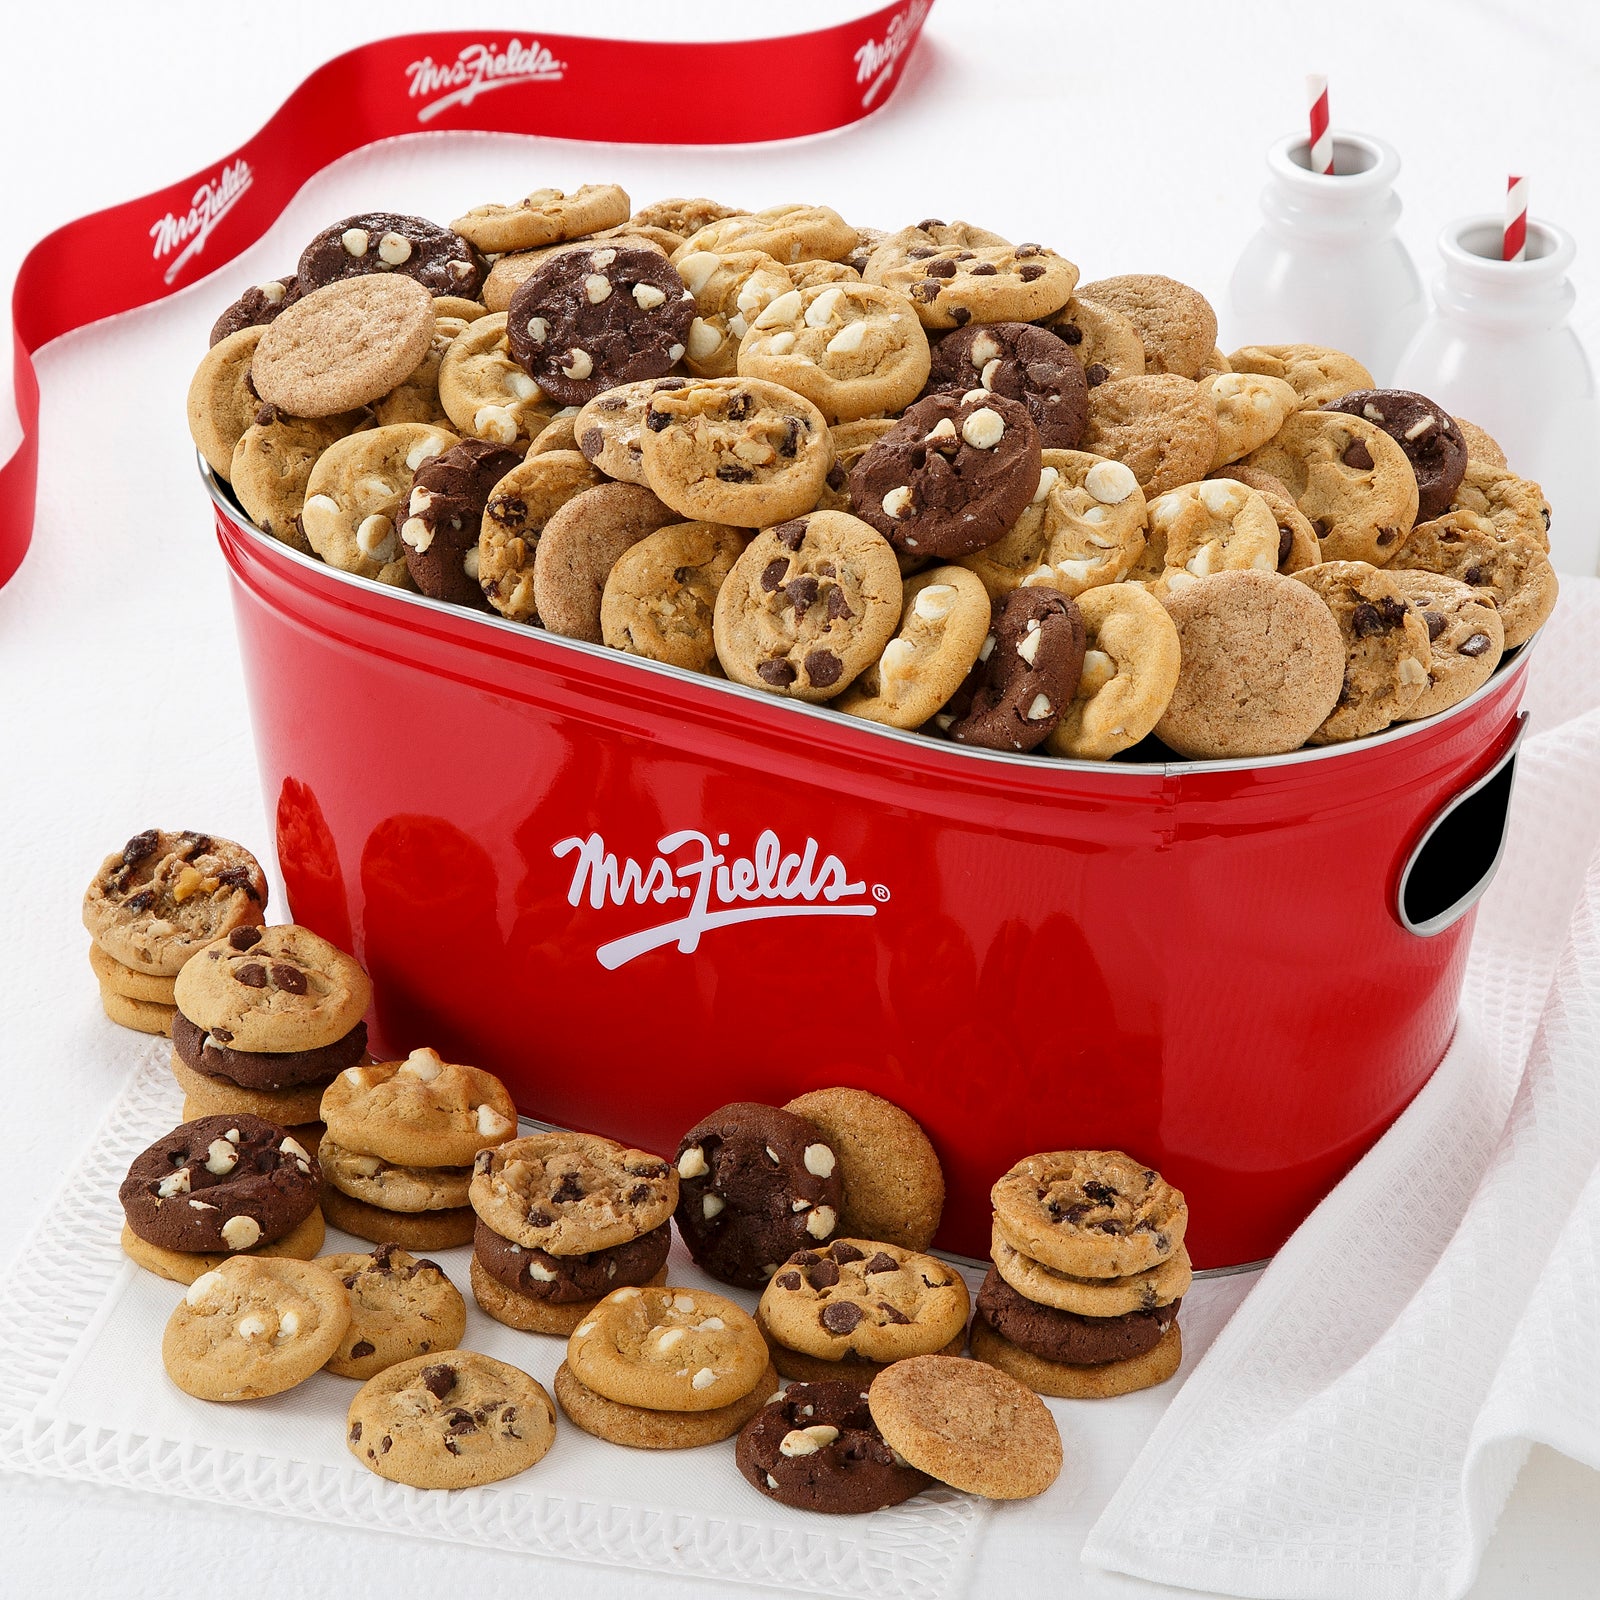 Signature red Mrs. Fields tub filled with an assortment of nibblers